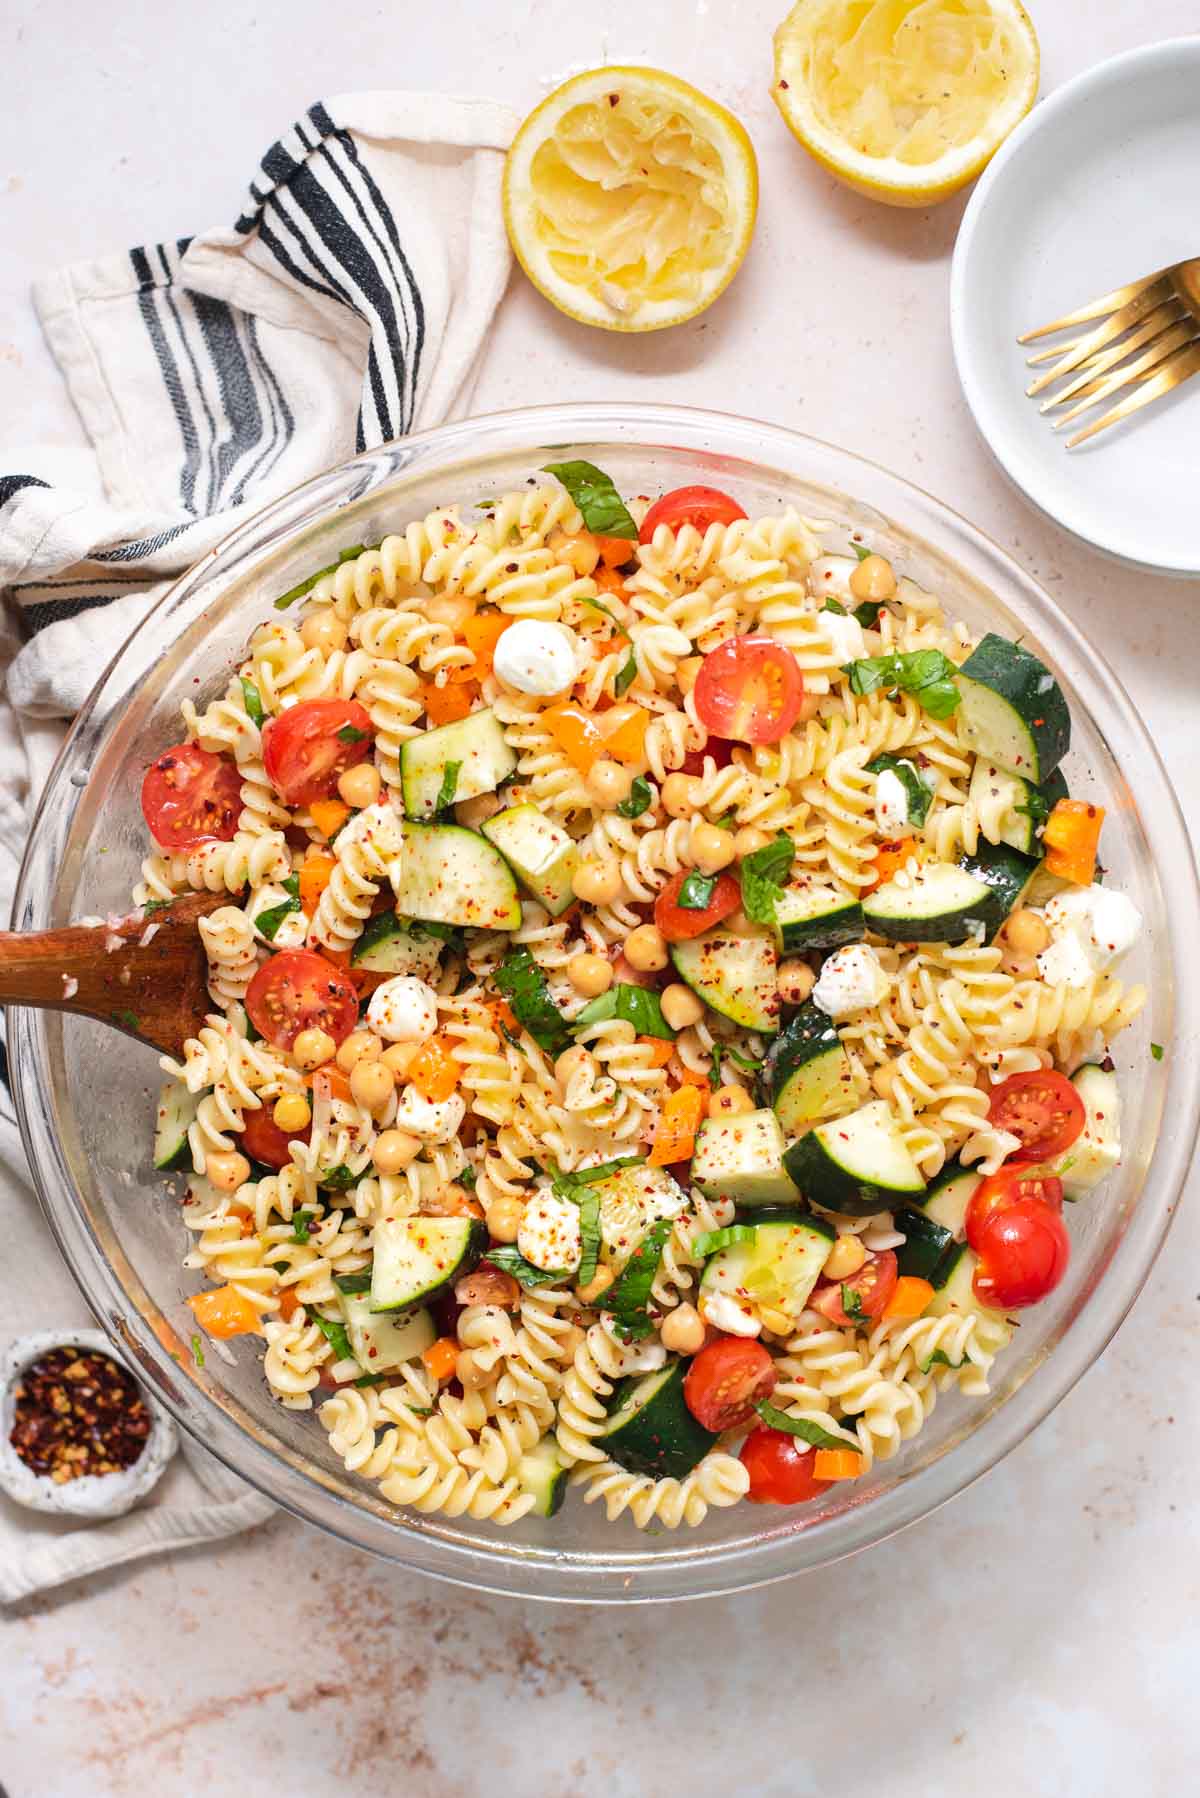 Overhead view of large glass bowl filled with pasta salad 